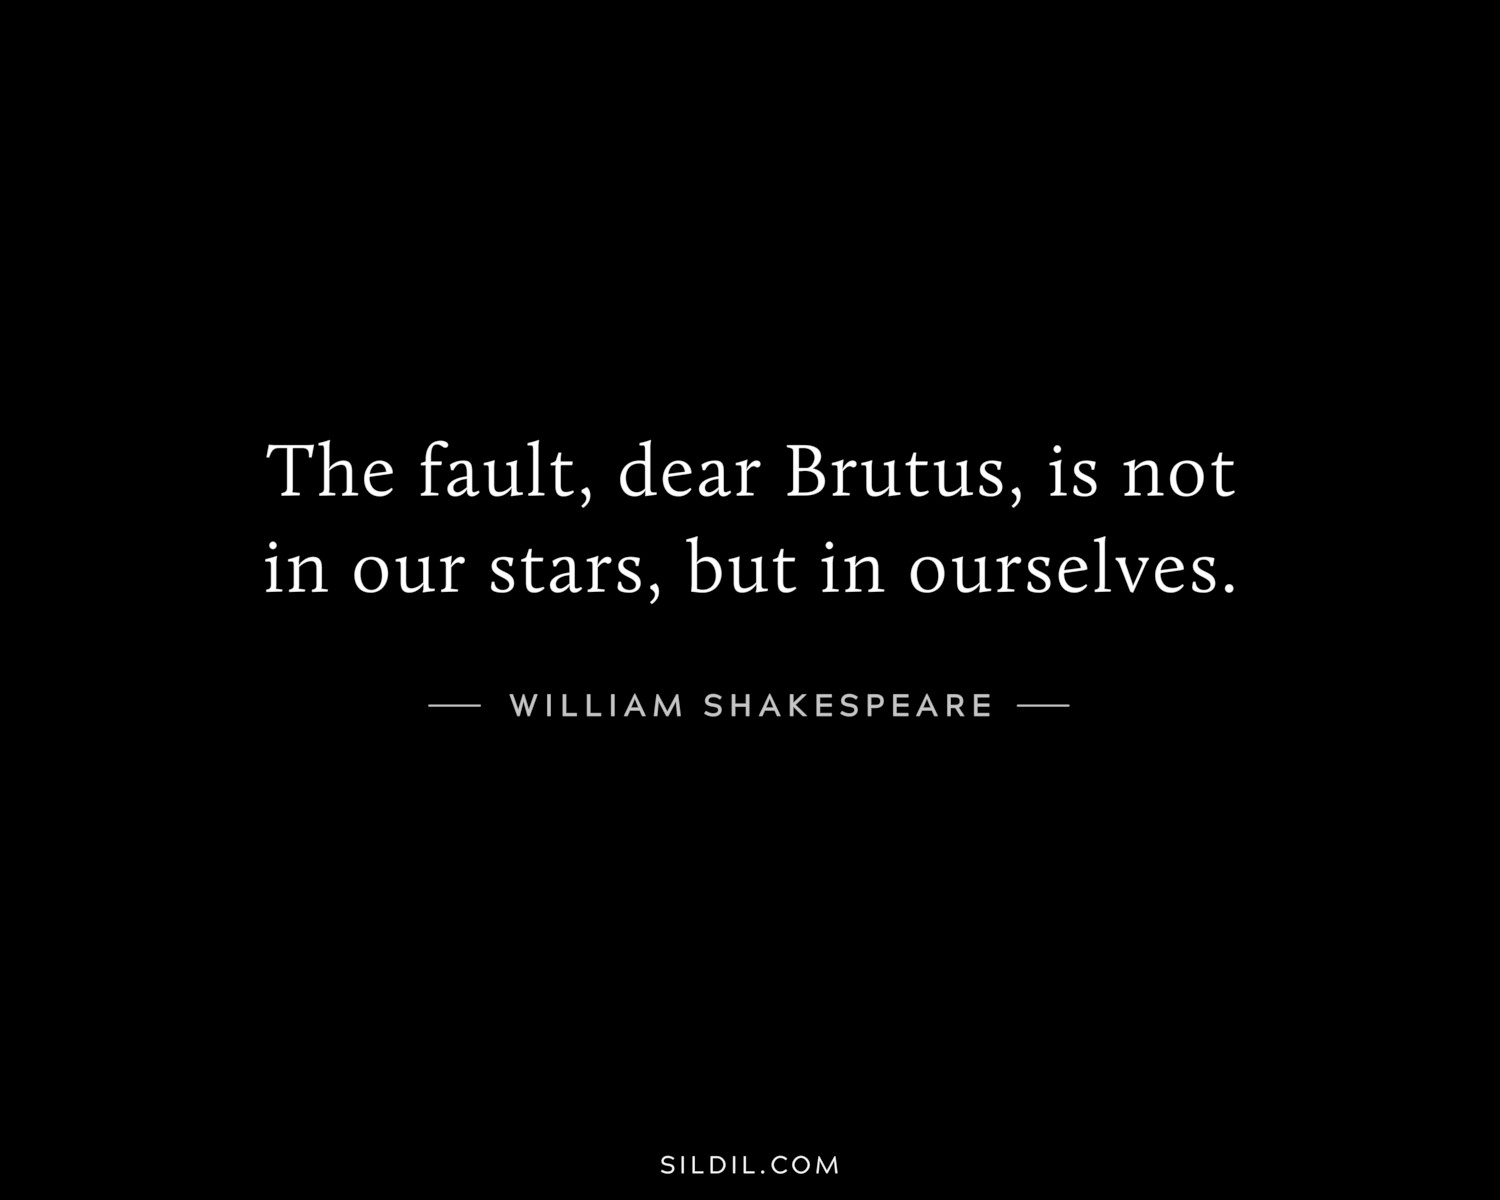 The fault, dear Brutus, is not in our stars, but in ourselves.